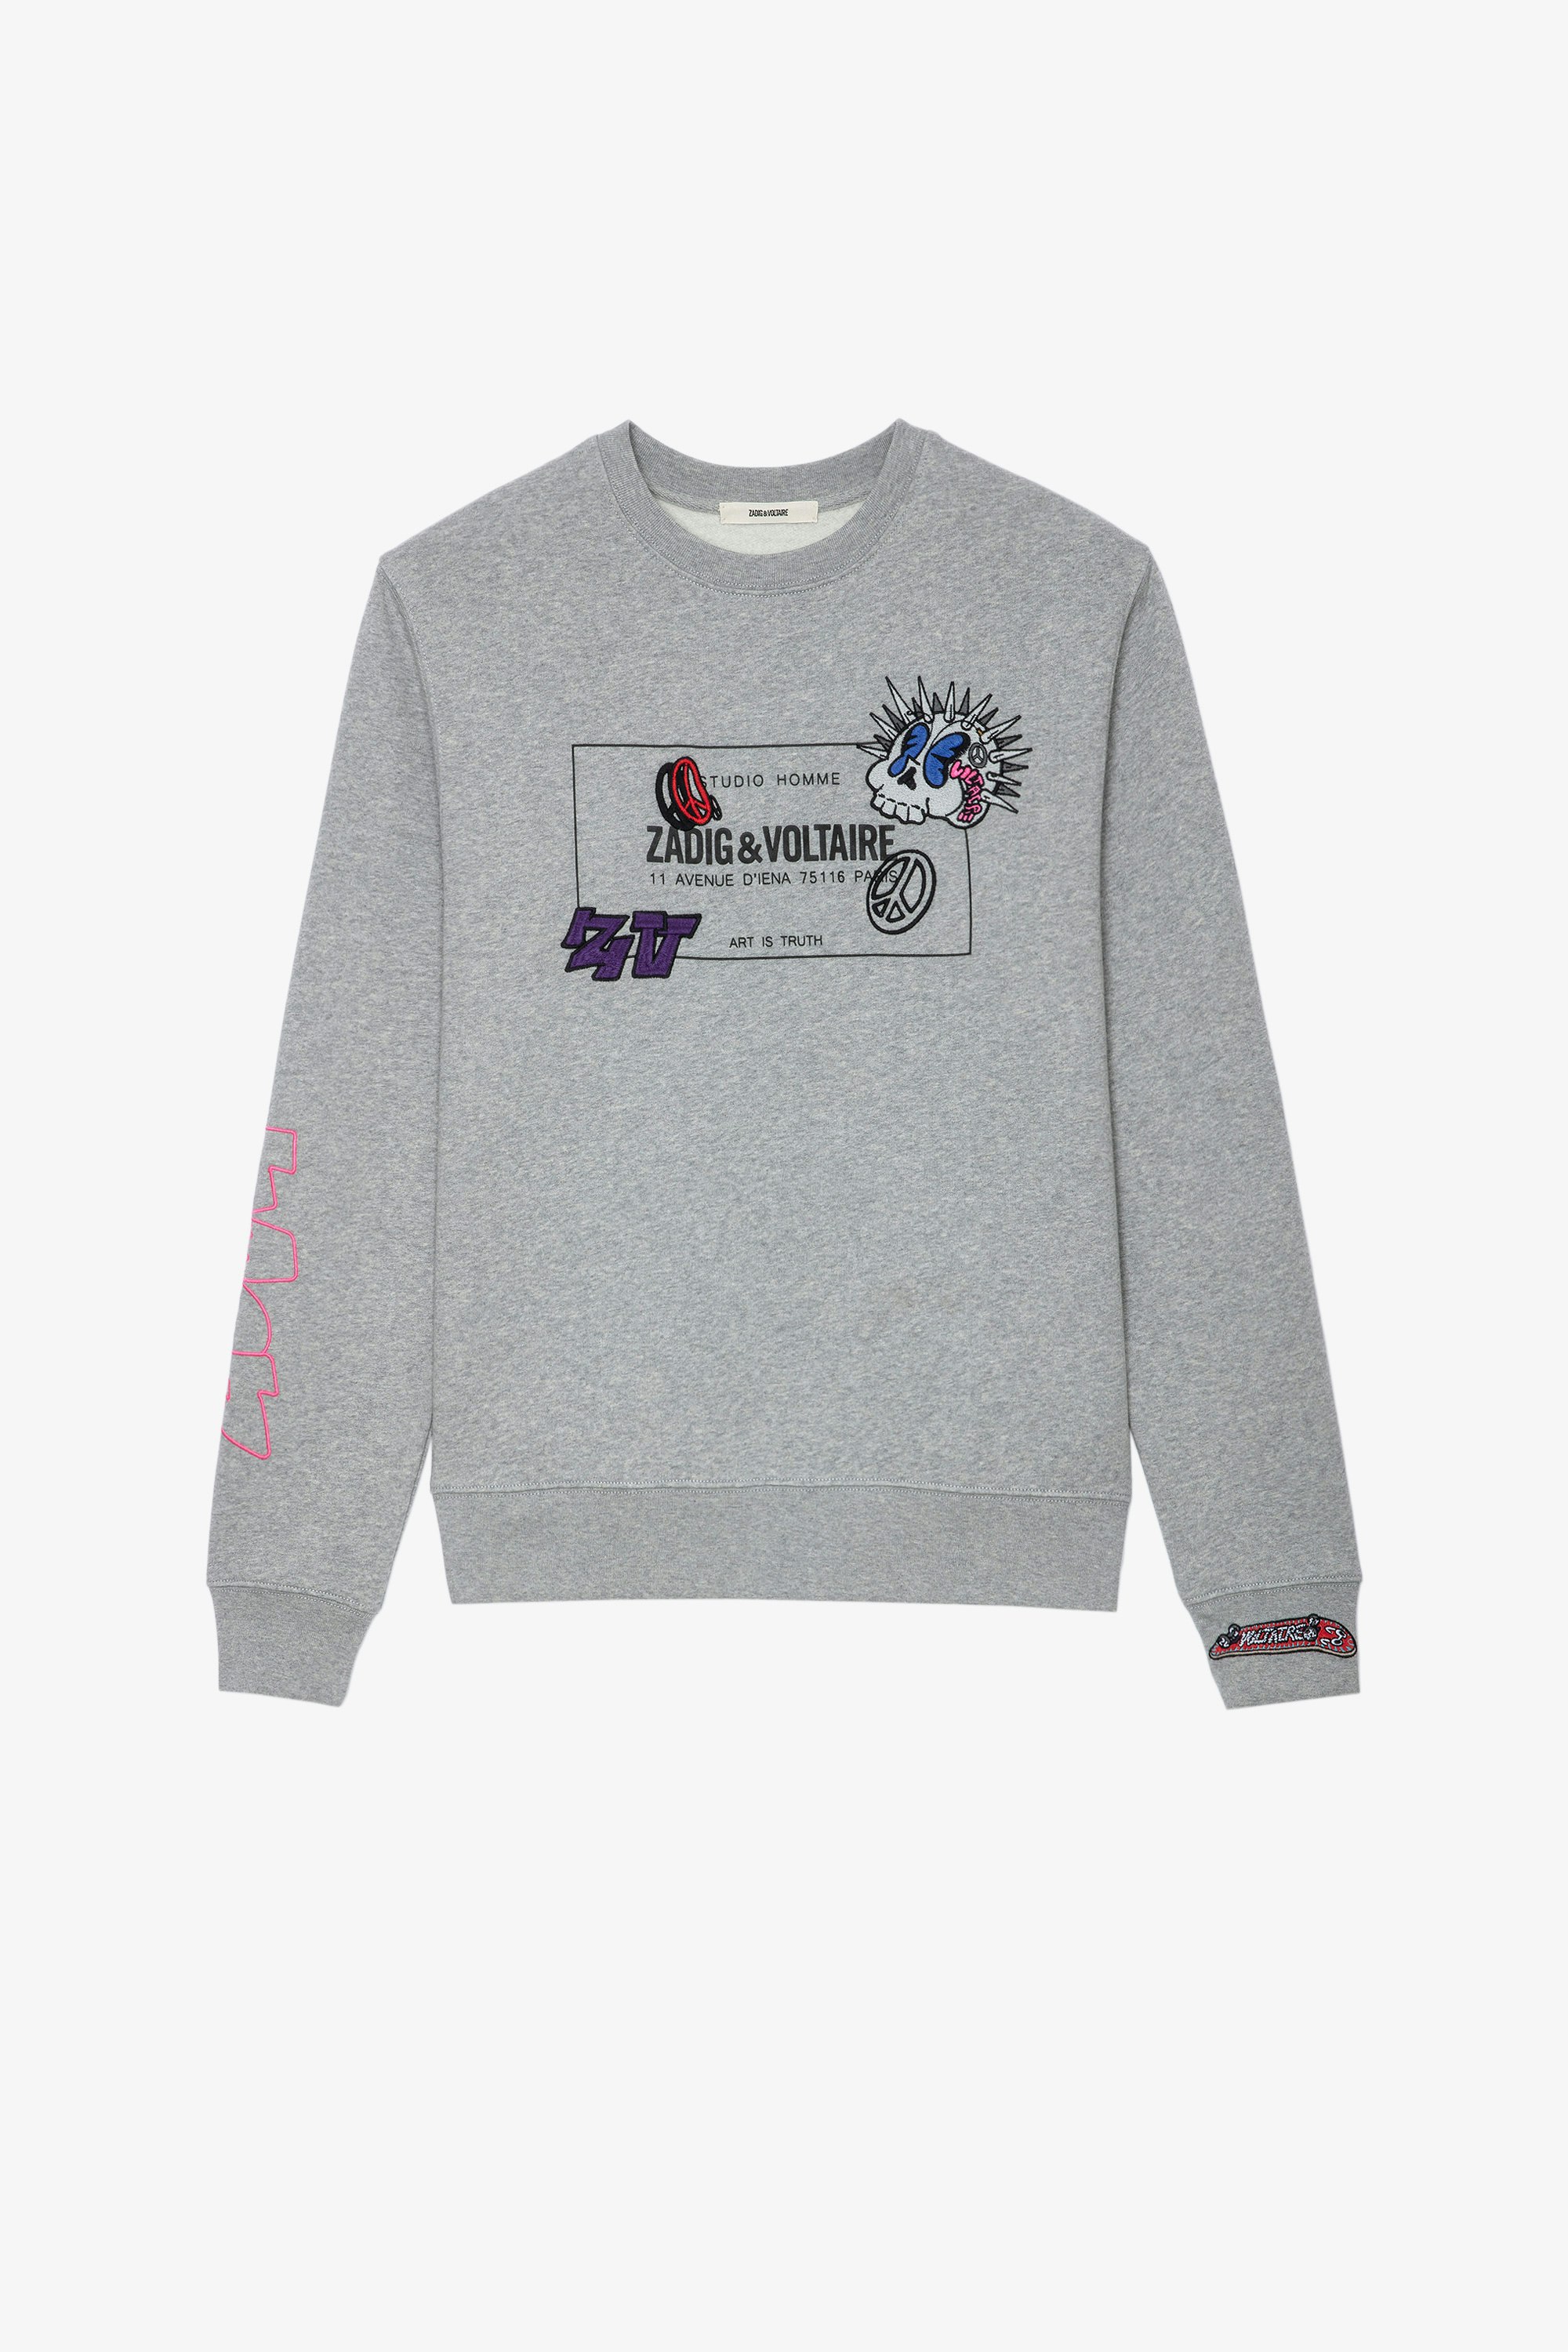 Simba Insignia Sweatshirt Men’s sweatshirt in grey marl cotton with the brand insignia and embroidered motifs